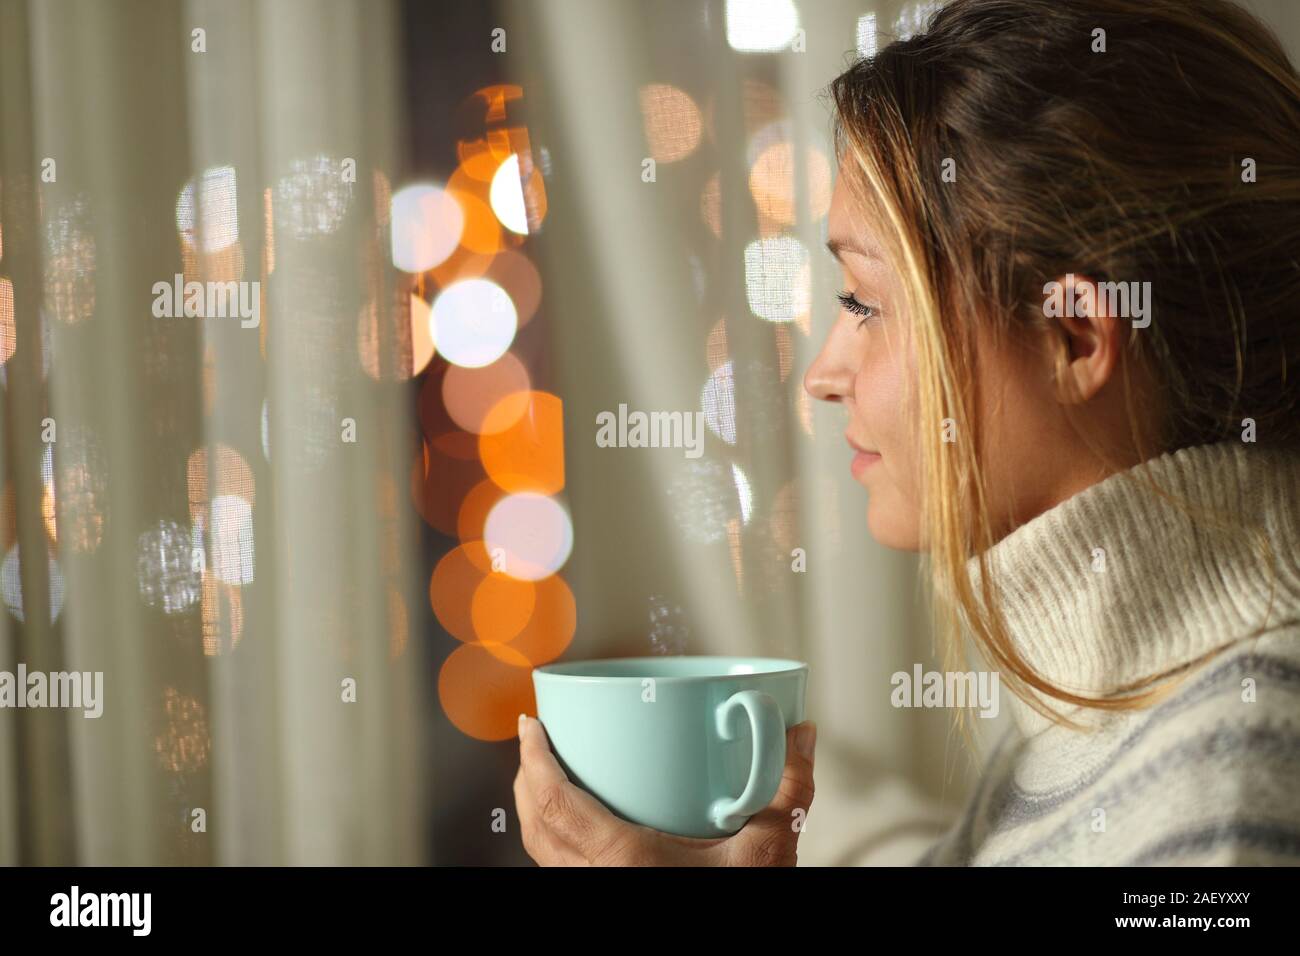 Woman holding coffee cup standing looking at city lights through a window in the night at home Stock Photo